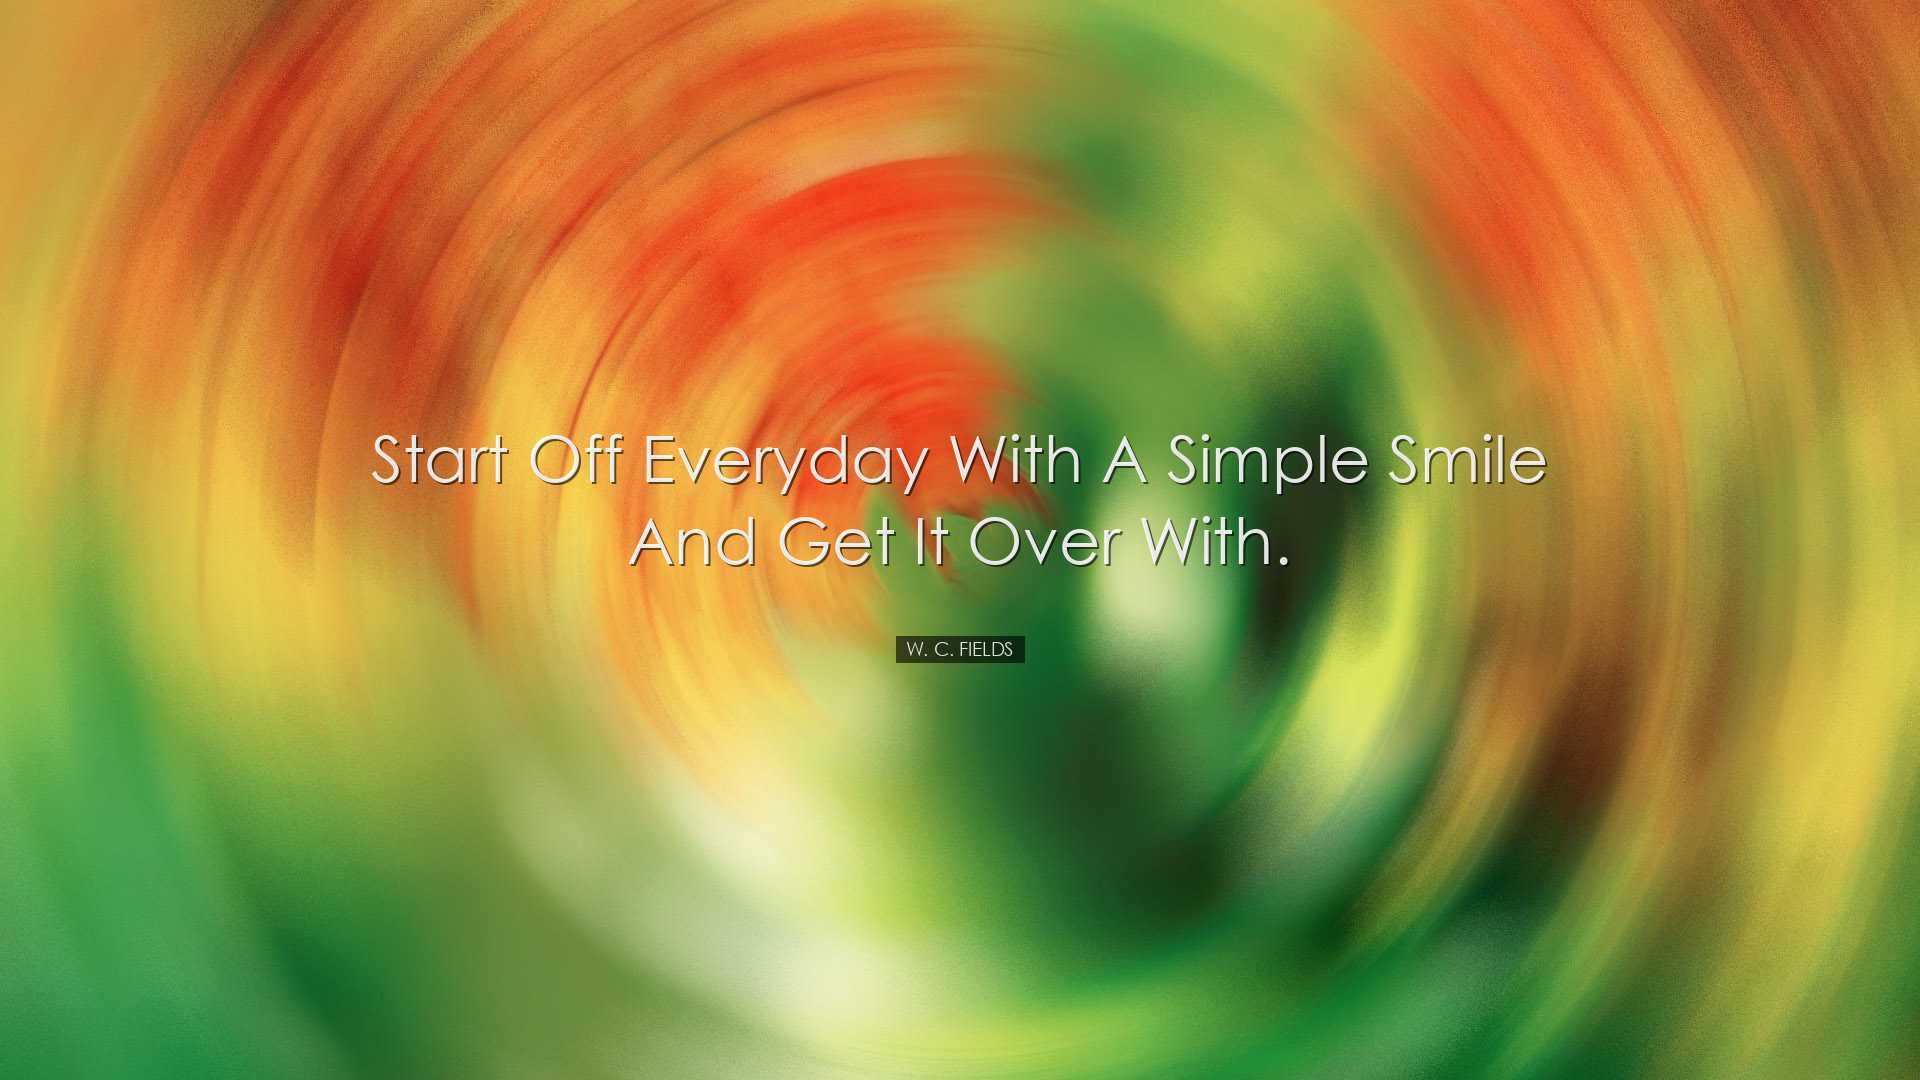 Start off everyday with a simple smile and get it over with. - W.